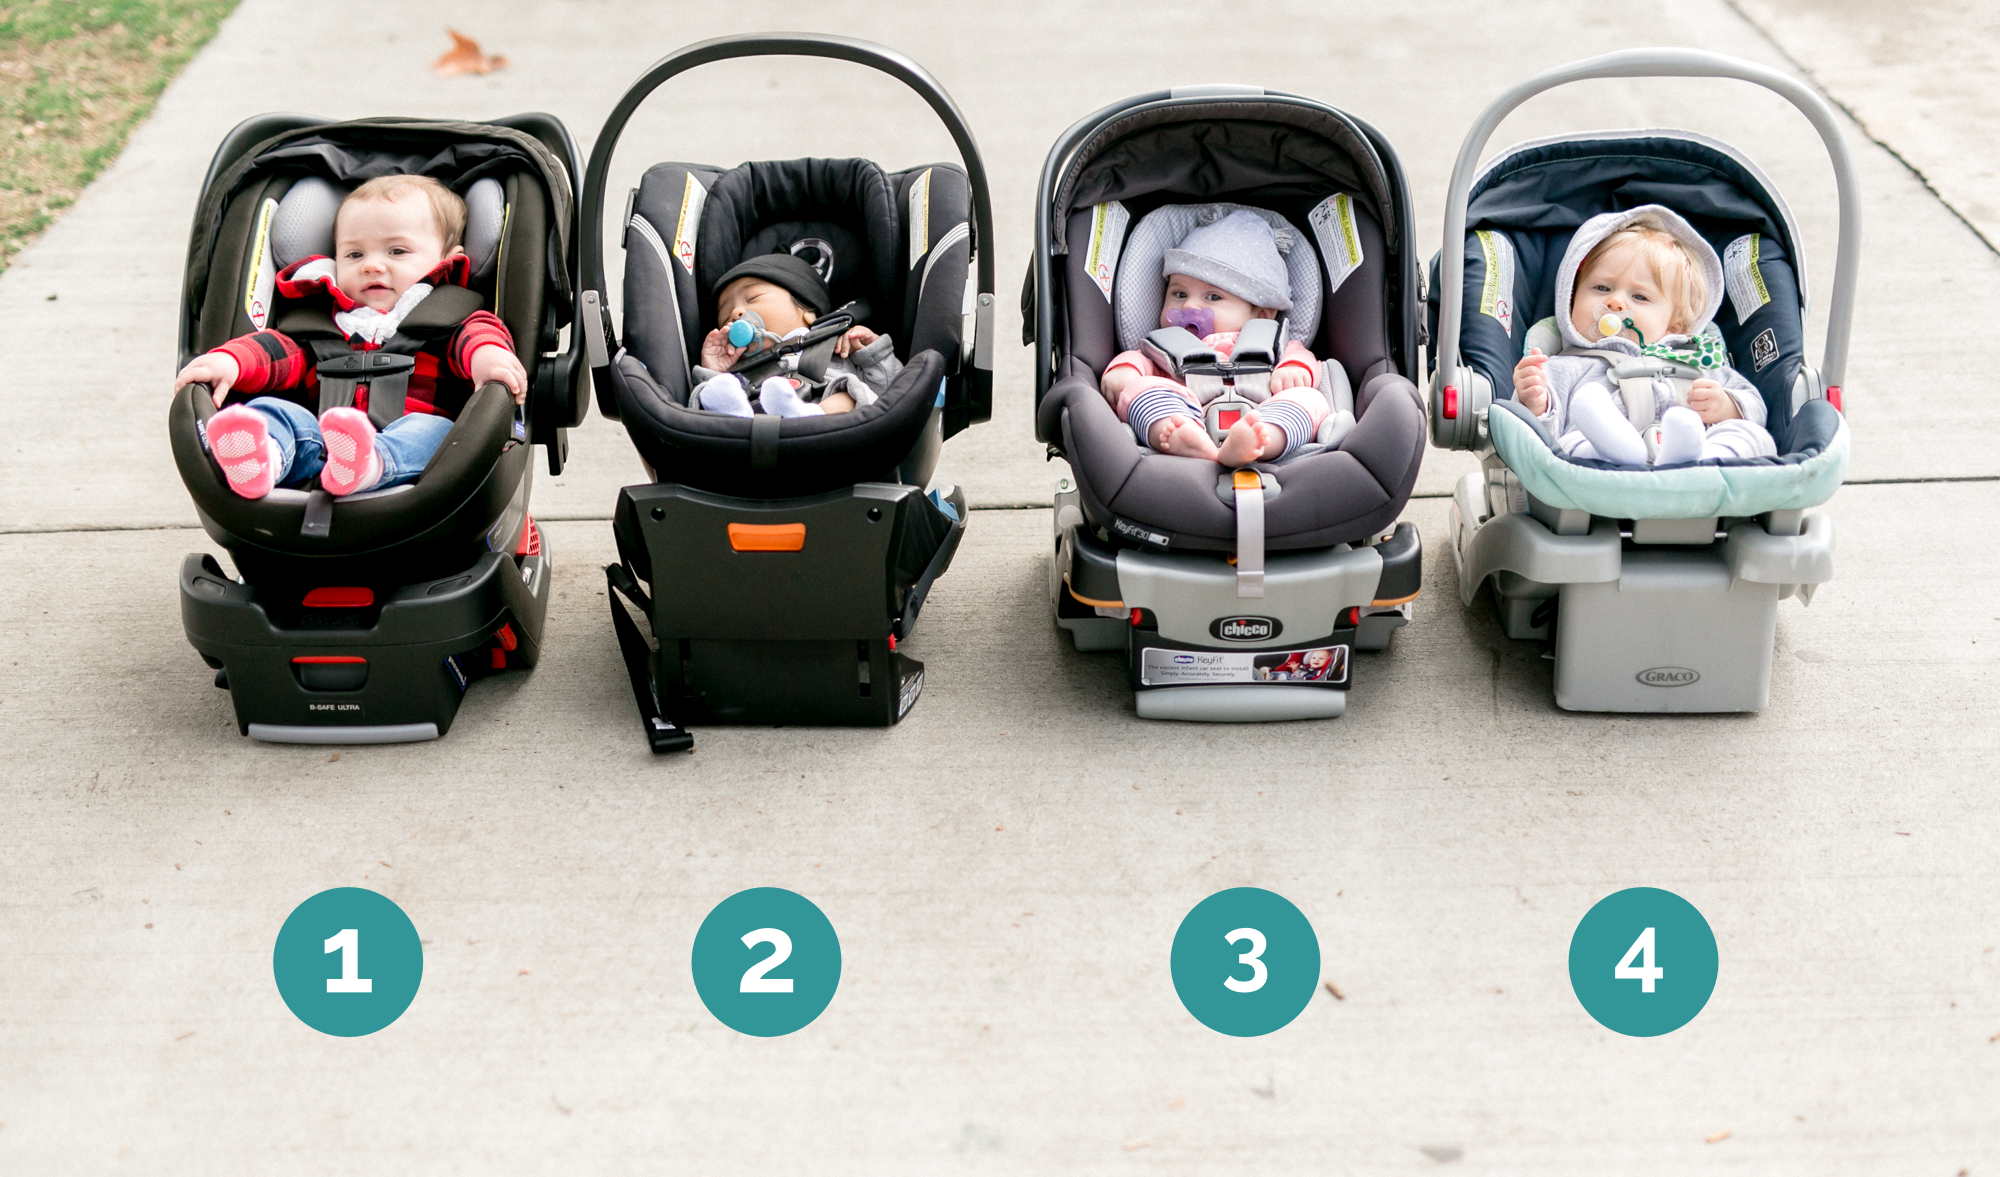 The Best Infant Car Seats Of 2021, What Is The Best Infant Car Seat On Market